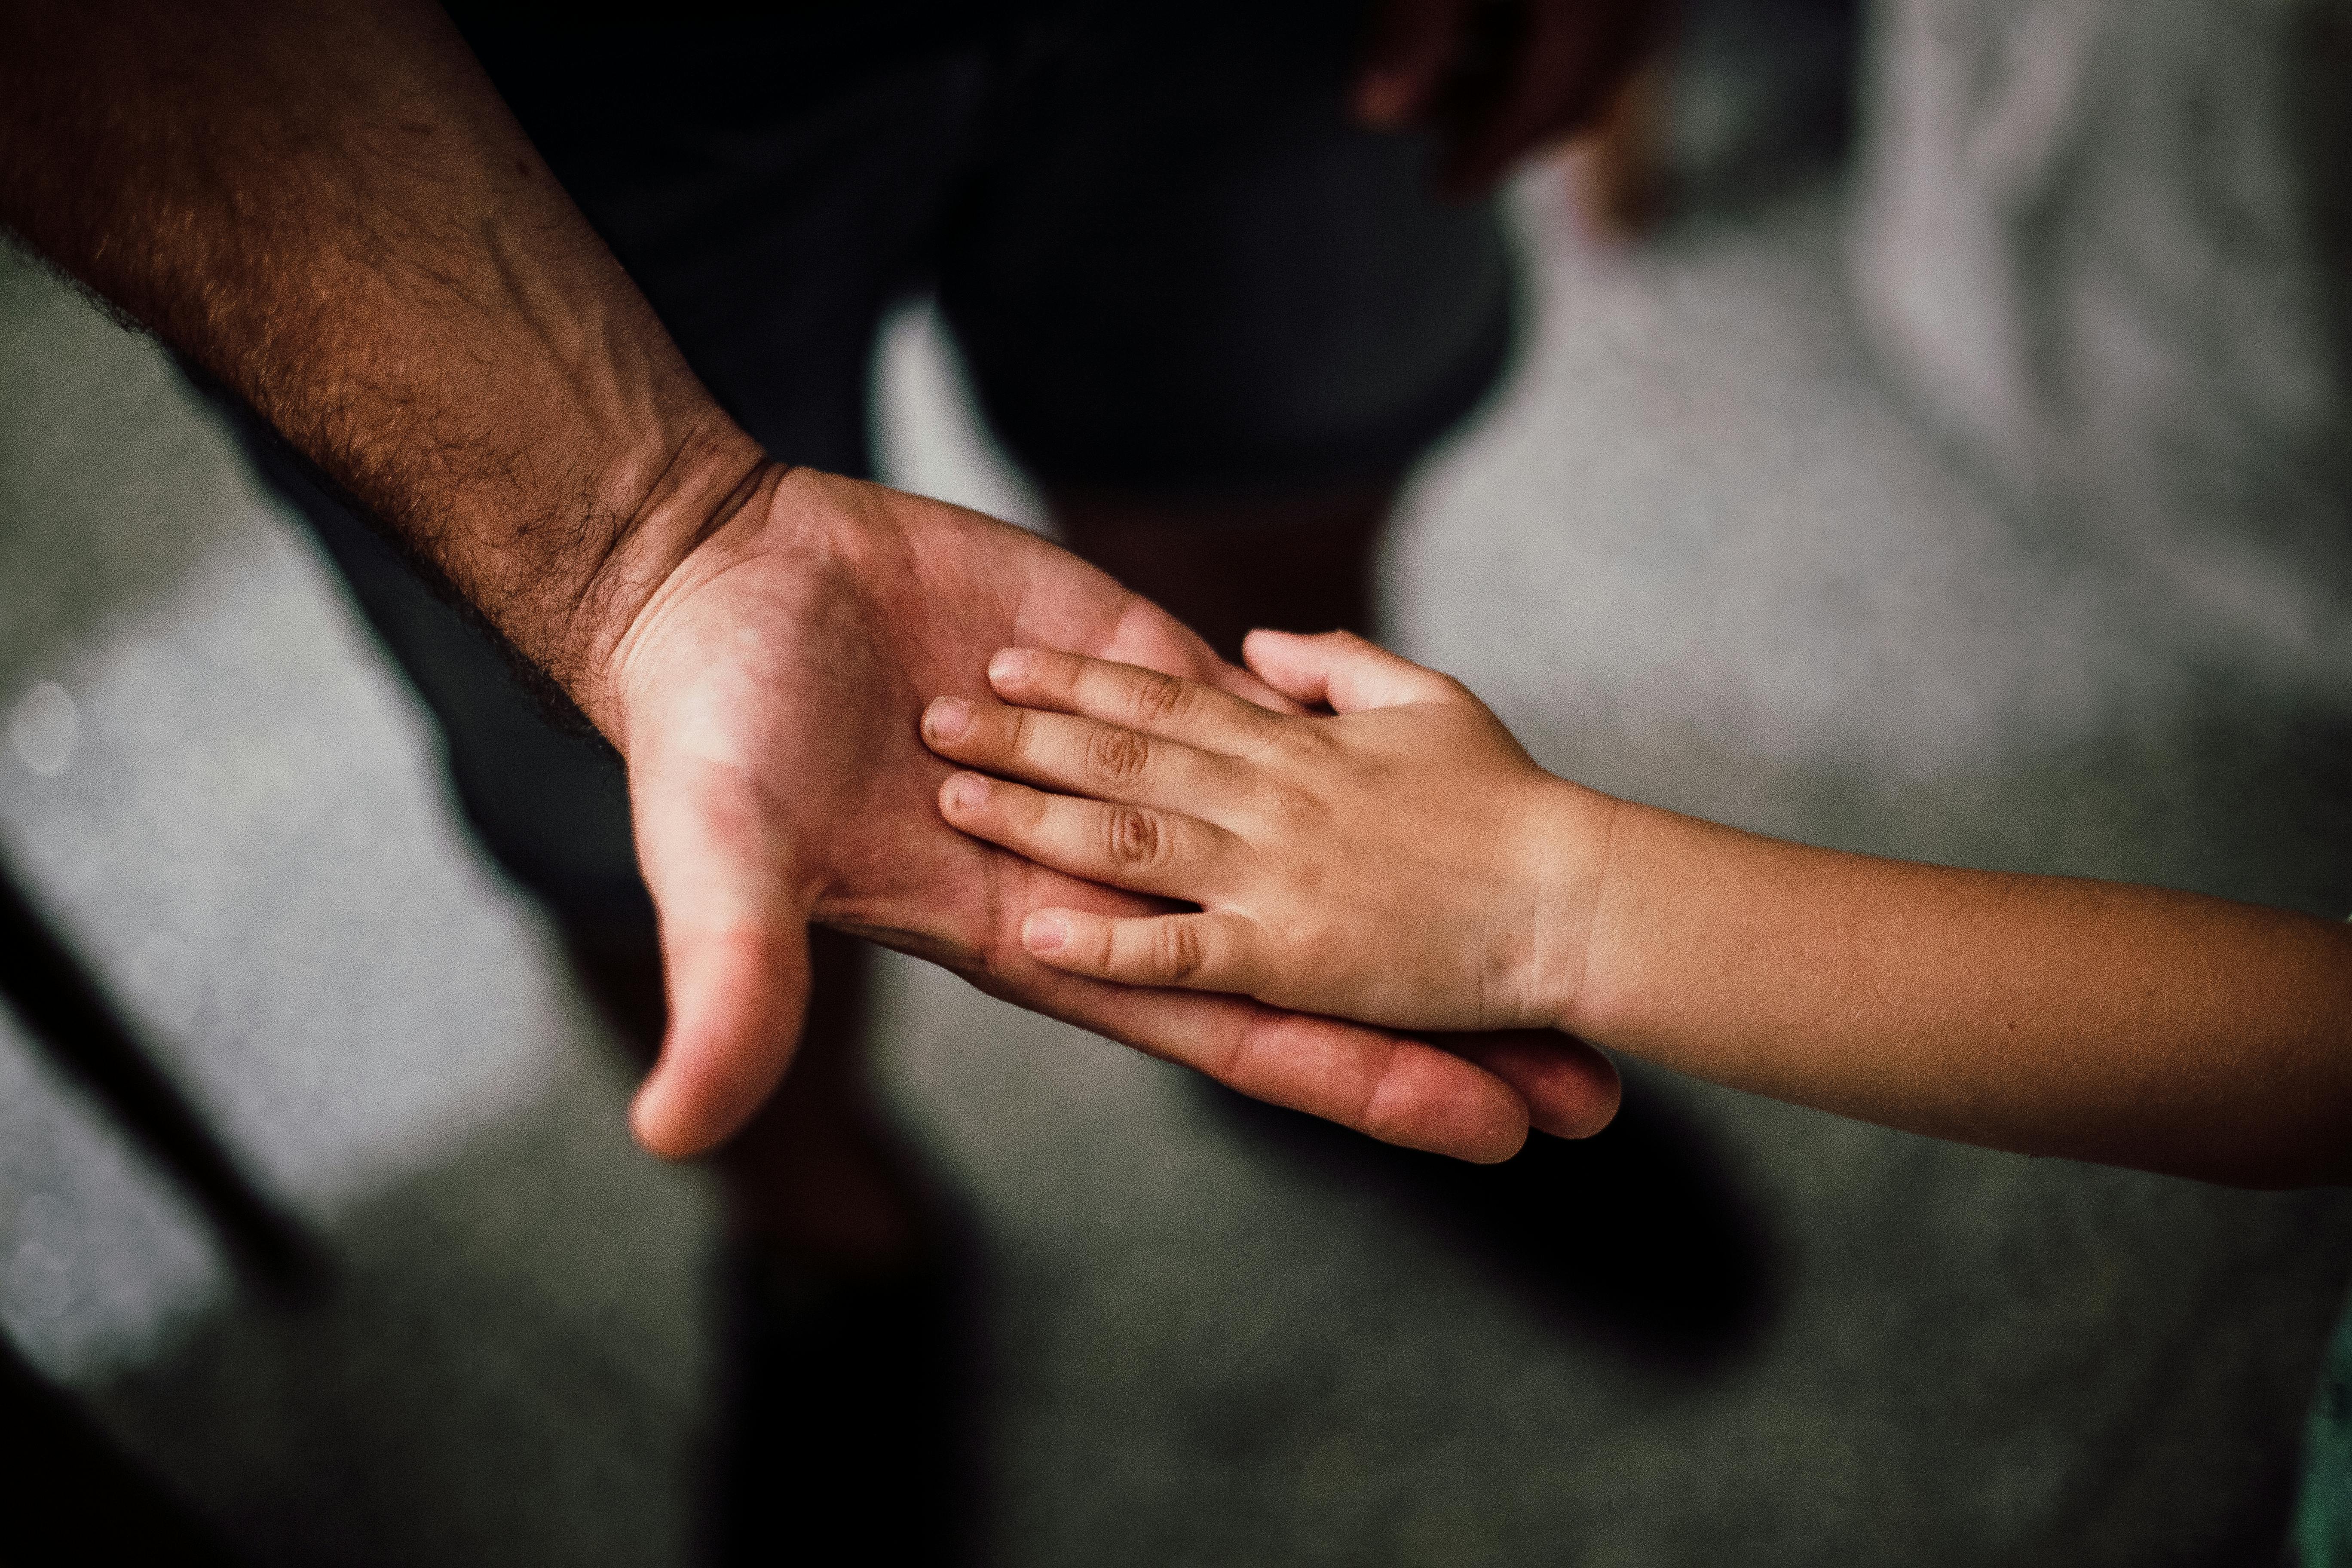 A child's hand on his father's palm | Source: Pexels